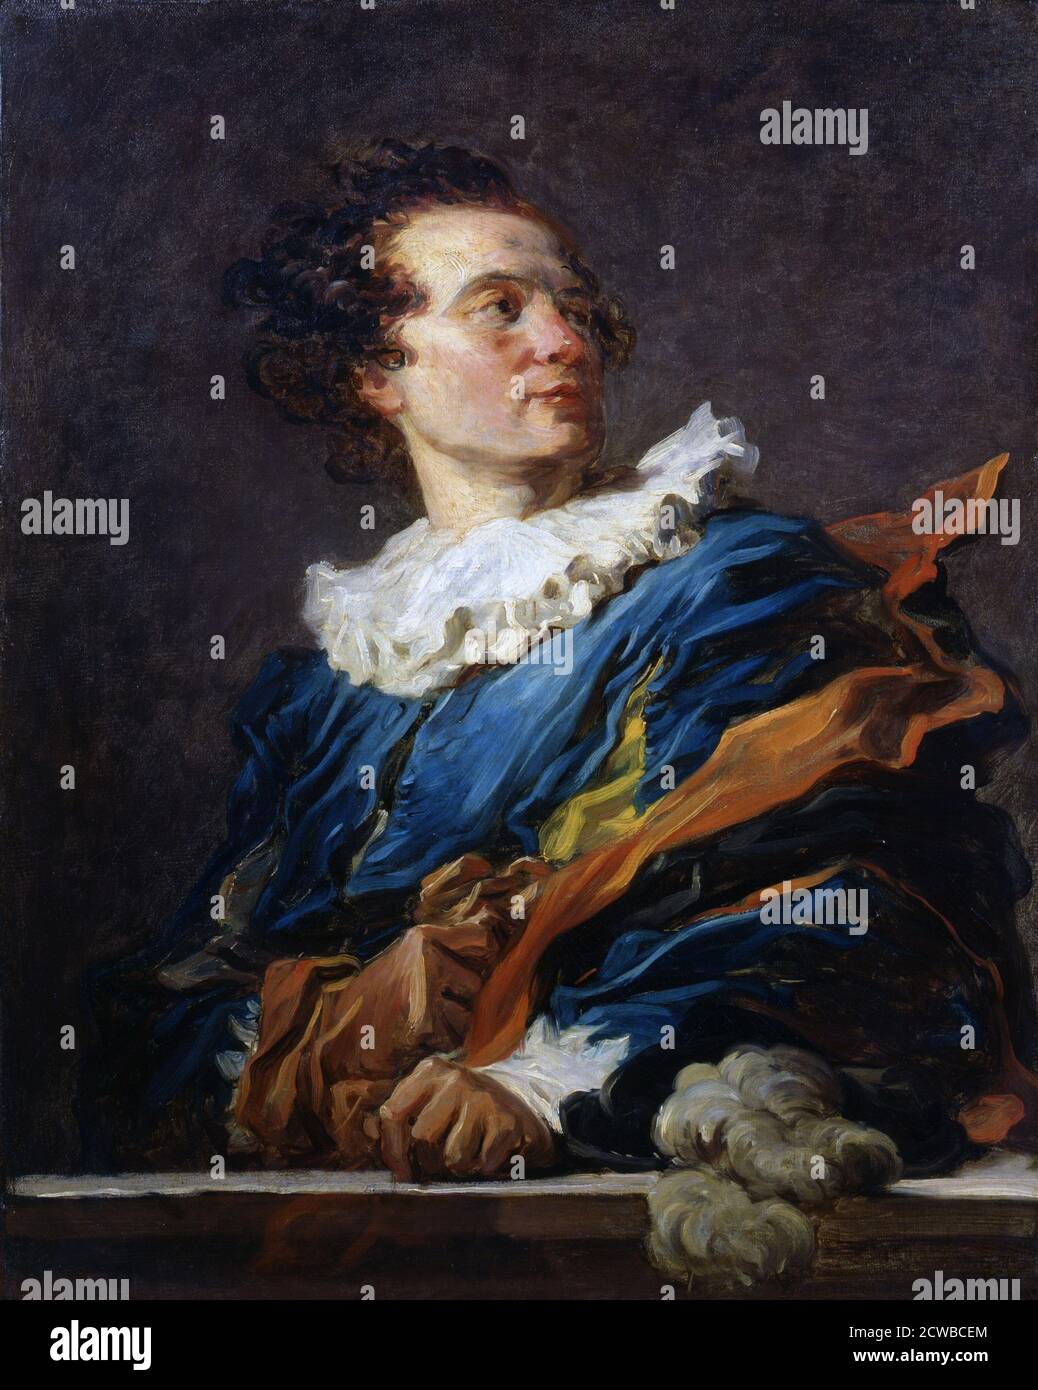 Figure of Fantasy: Portrait of the Abbot of Saint-Non', 1769, by the French artist Jean-Honore Fragonard. It was discovered in the collection of the Louvre, Paris, France. Stock Photo